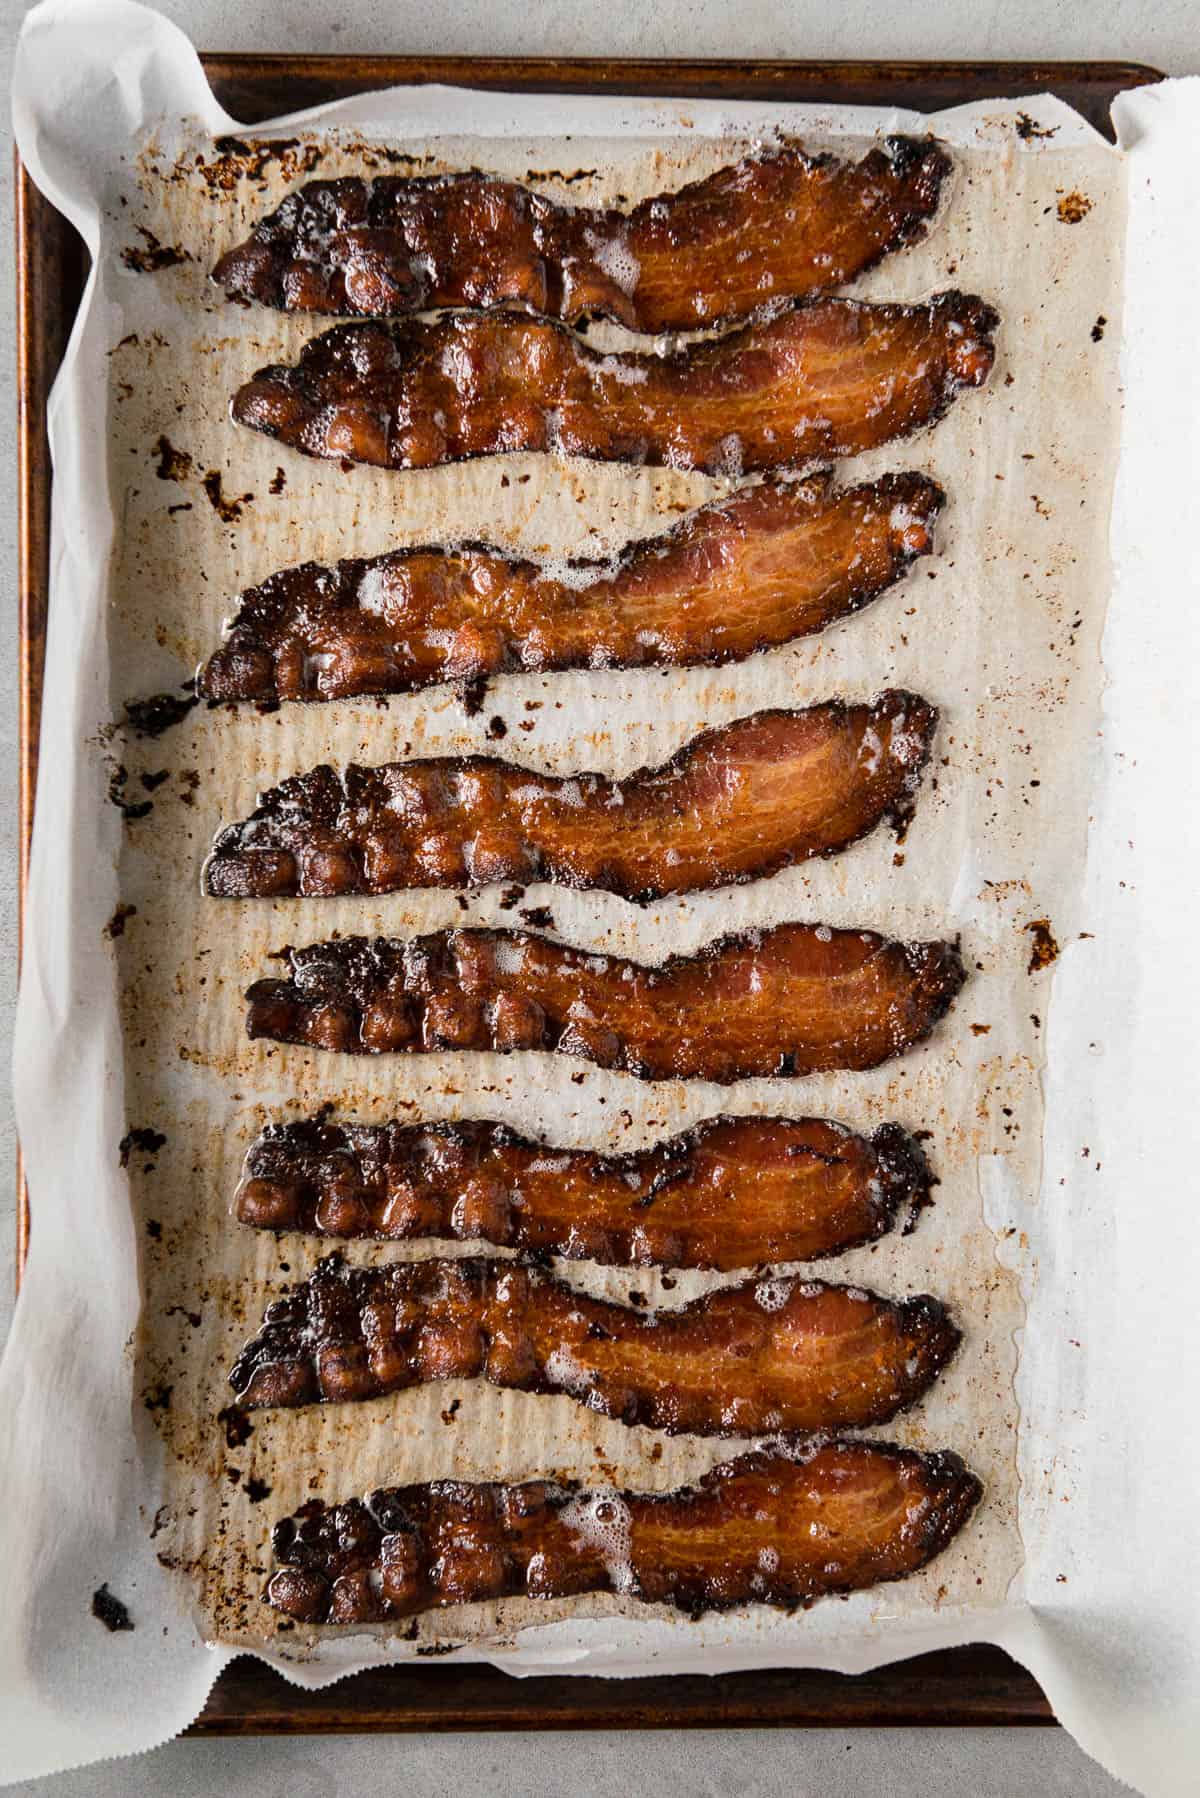 https://selfproclaimedfoodie.com/wp-content/uploads/cook-bacon-oven-self-proclaimed-foodie-4.jpg